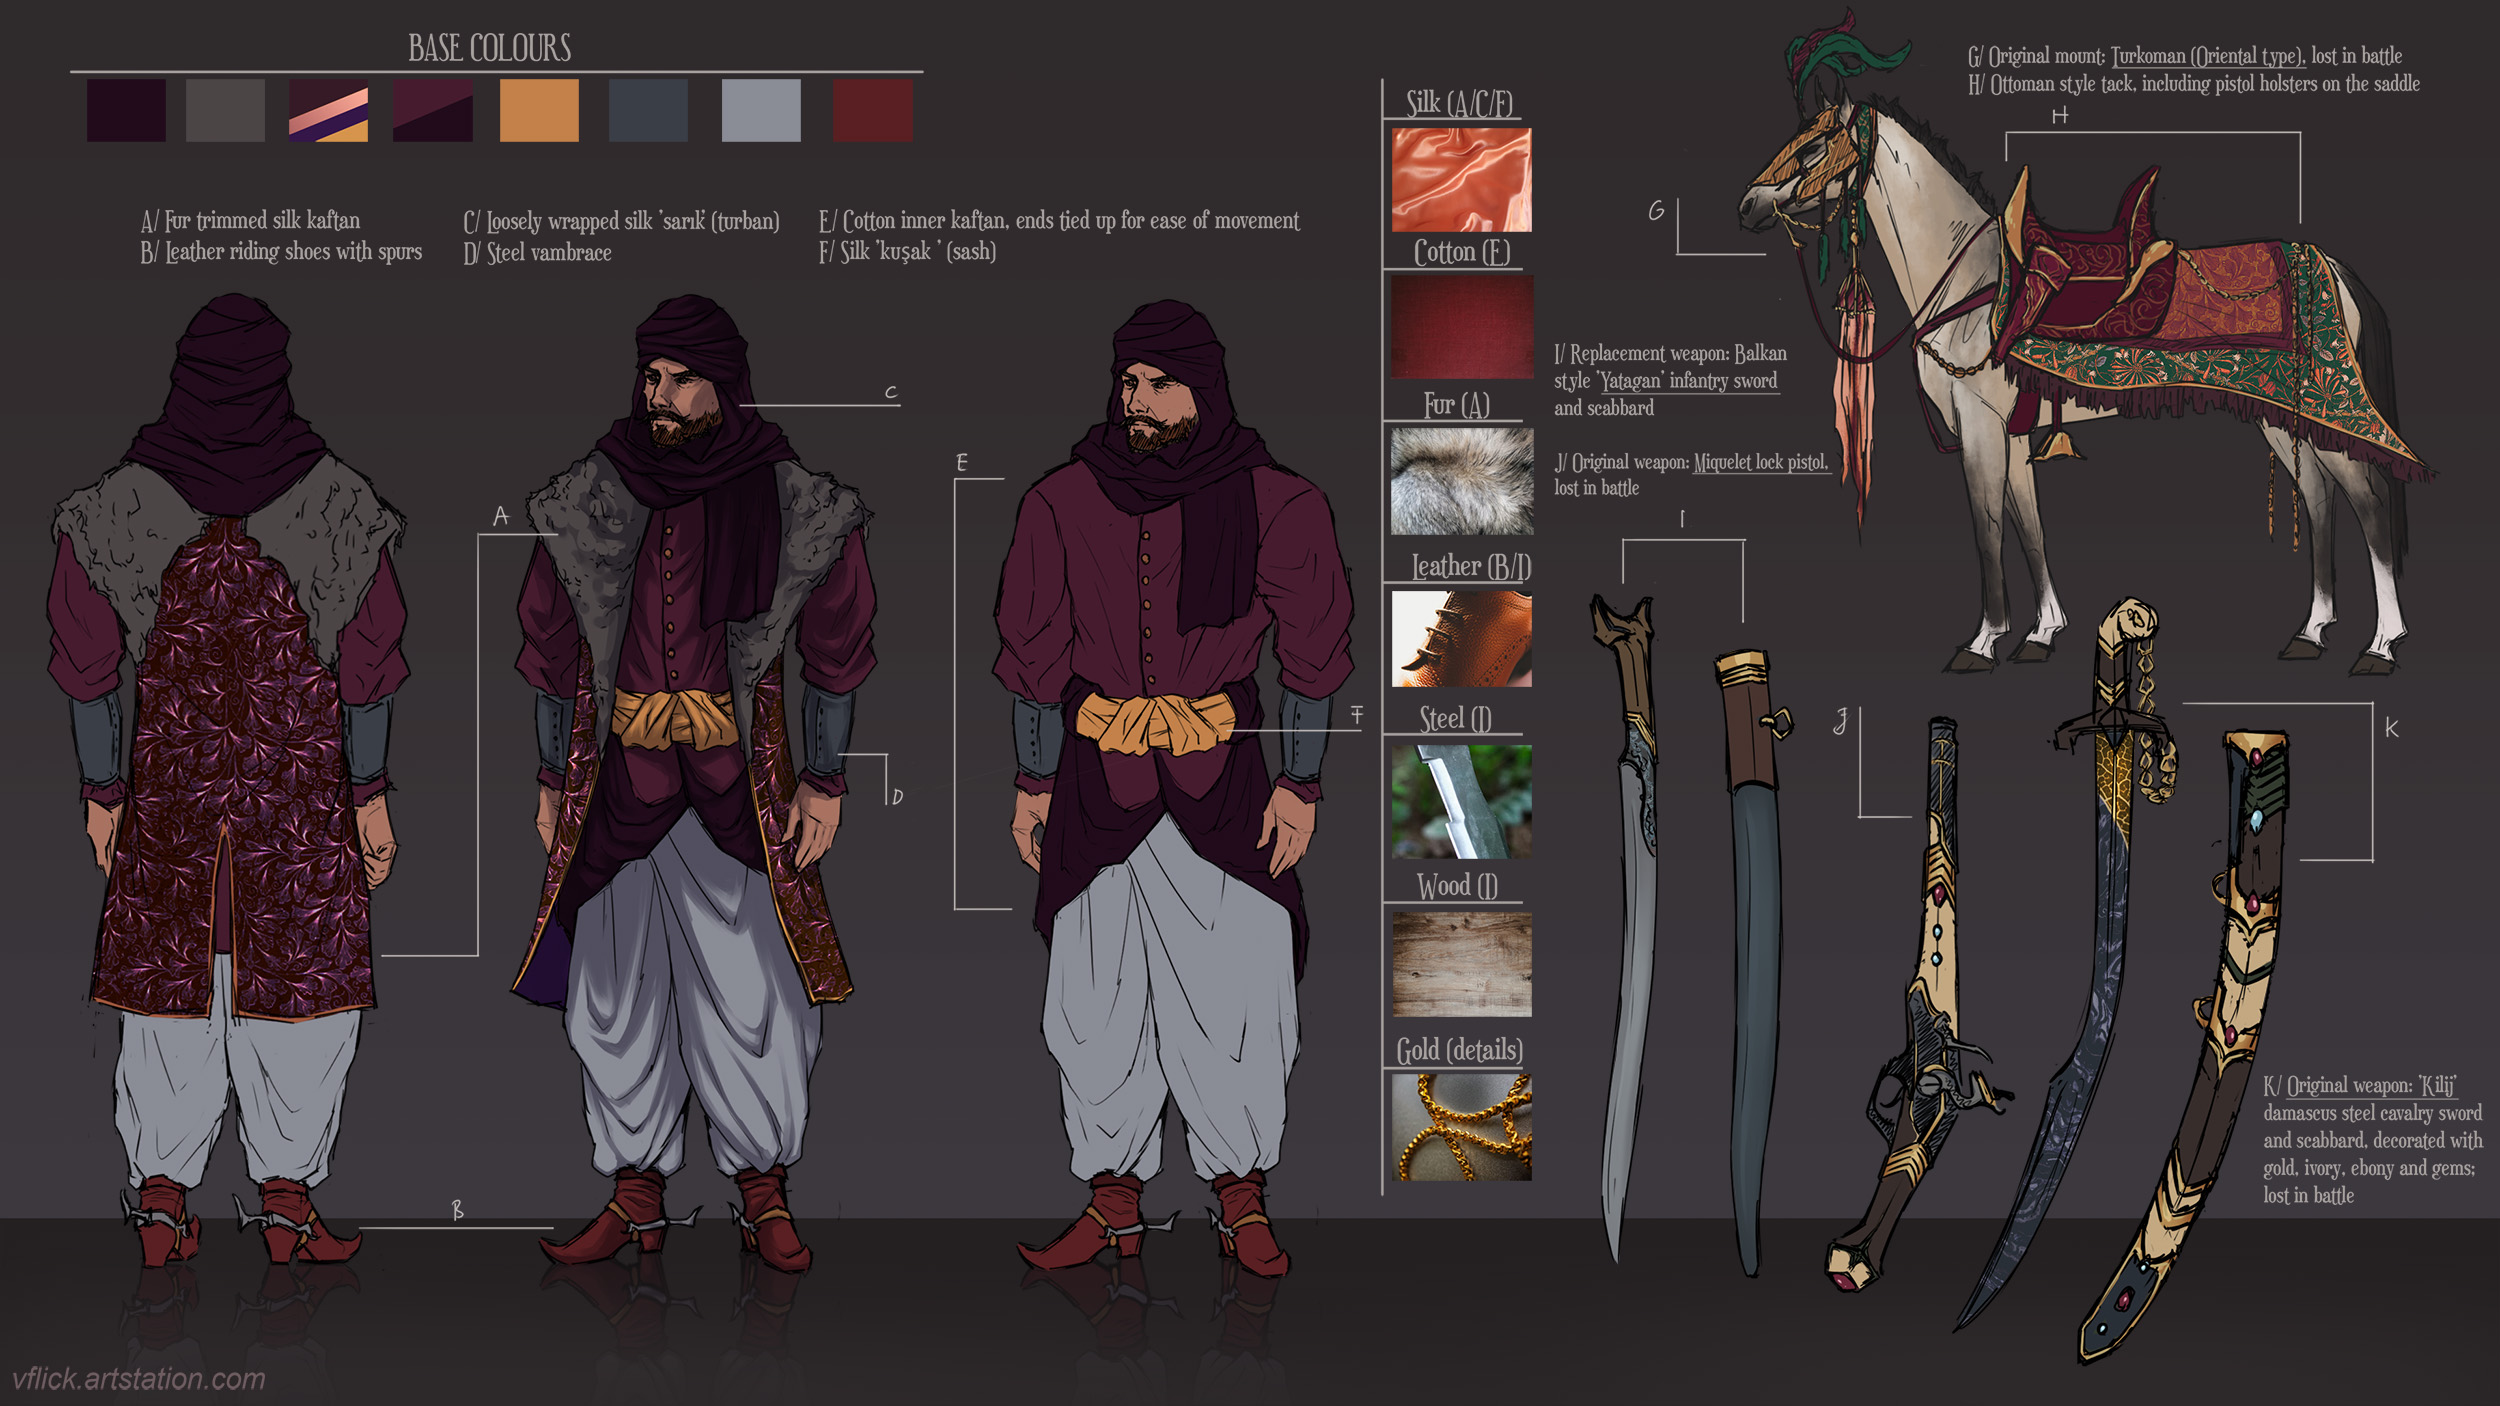 Character sheet depicting a male character in Ottoman-style clothing, weaponry and mount, including description, base colours, and materials.